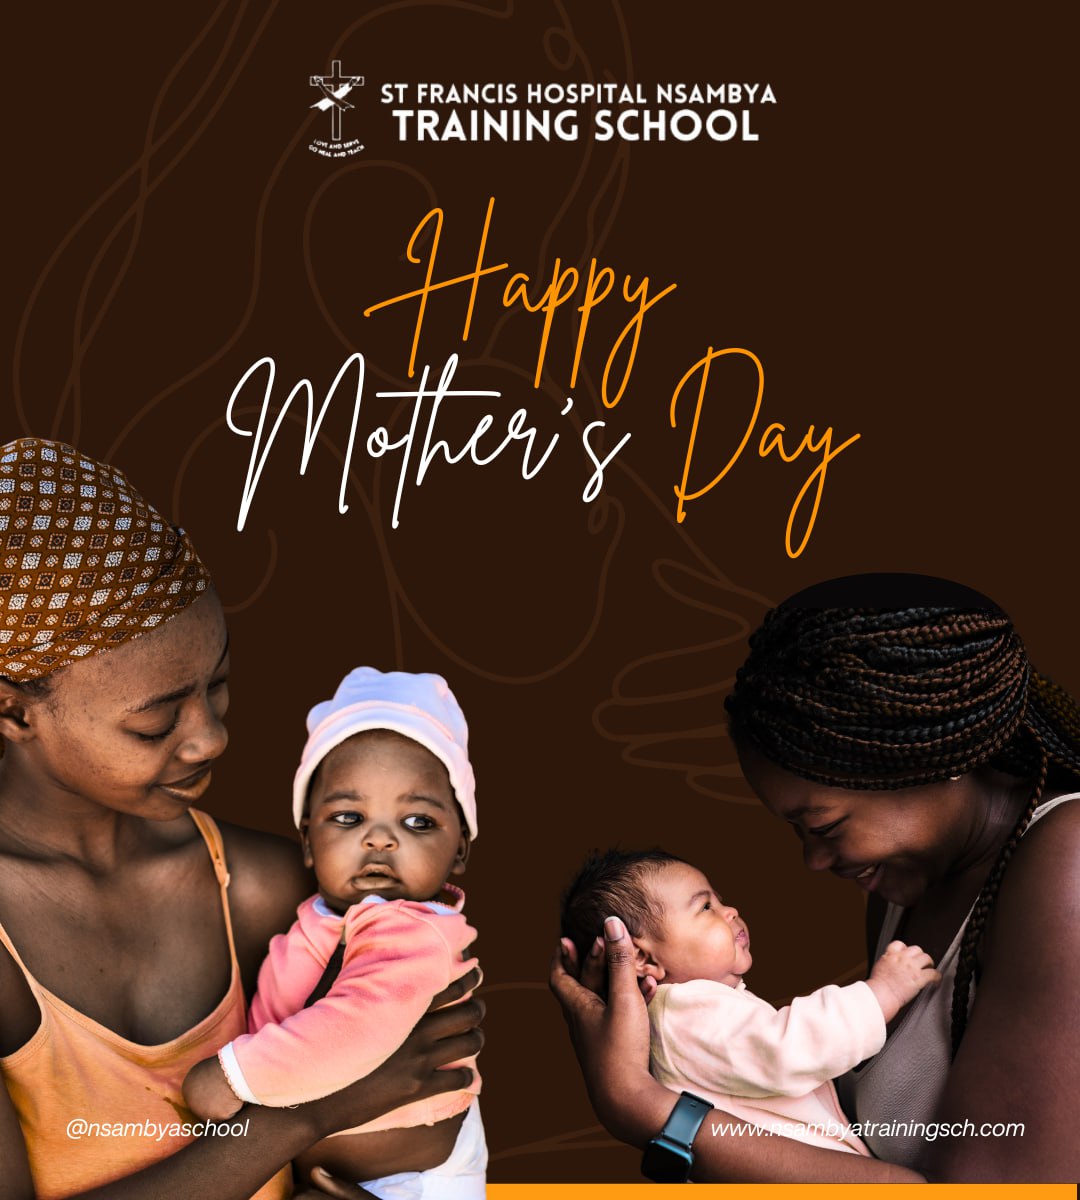 We wish all mothers a happy #MothersDay. From the #NsambyaHospitalTrainingSchool family.